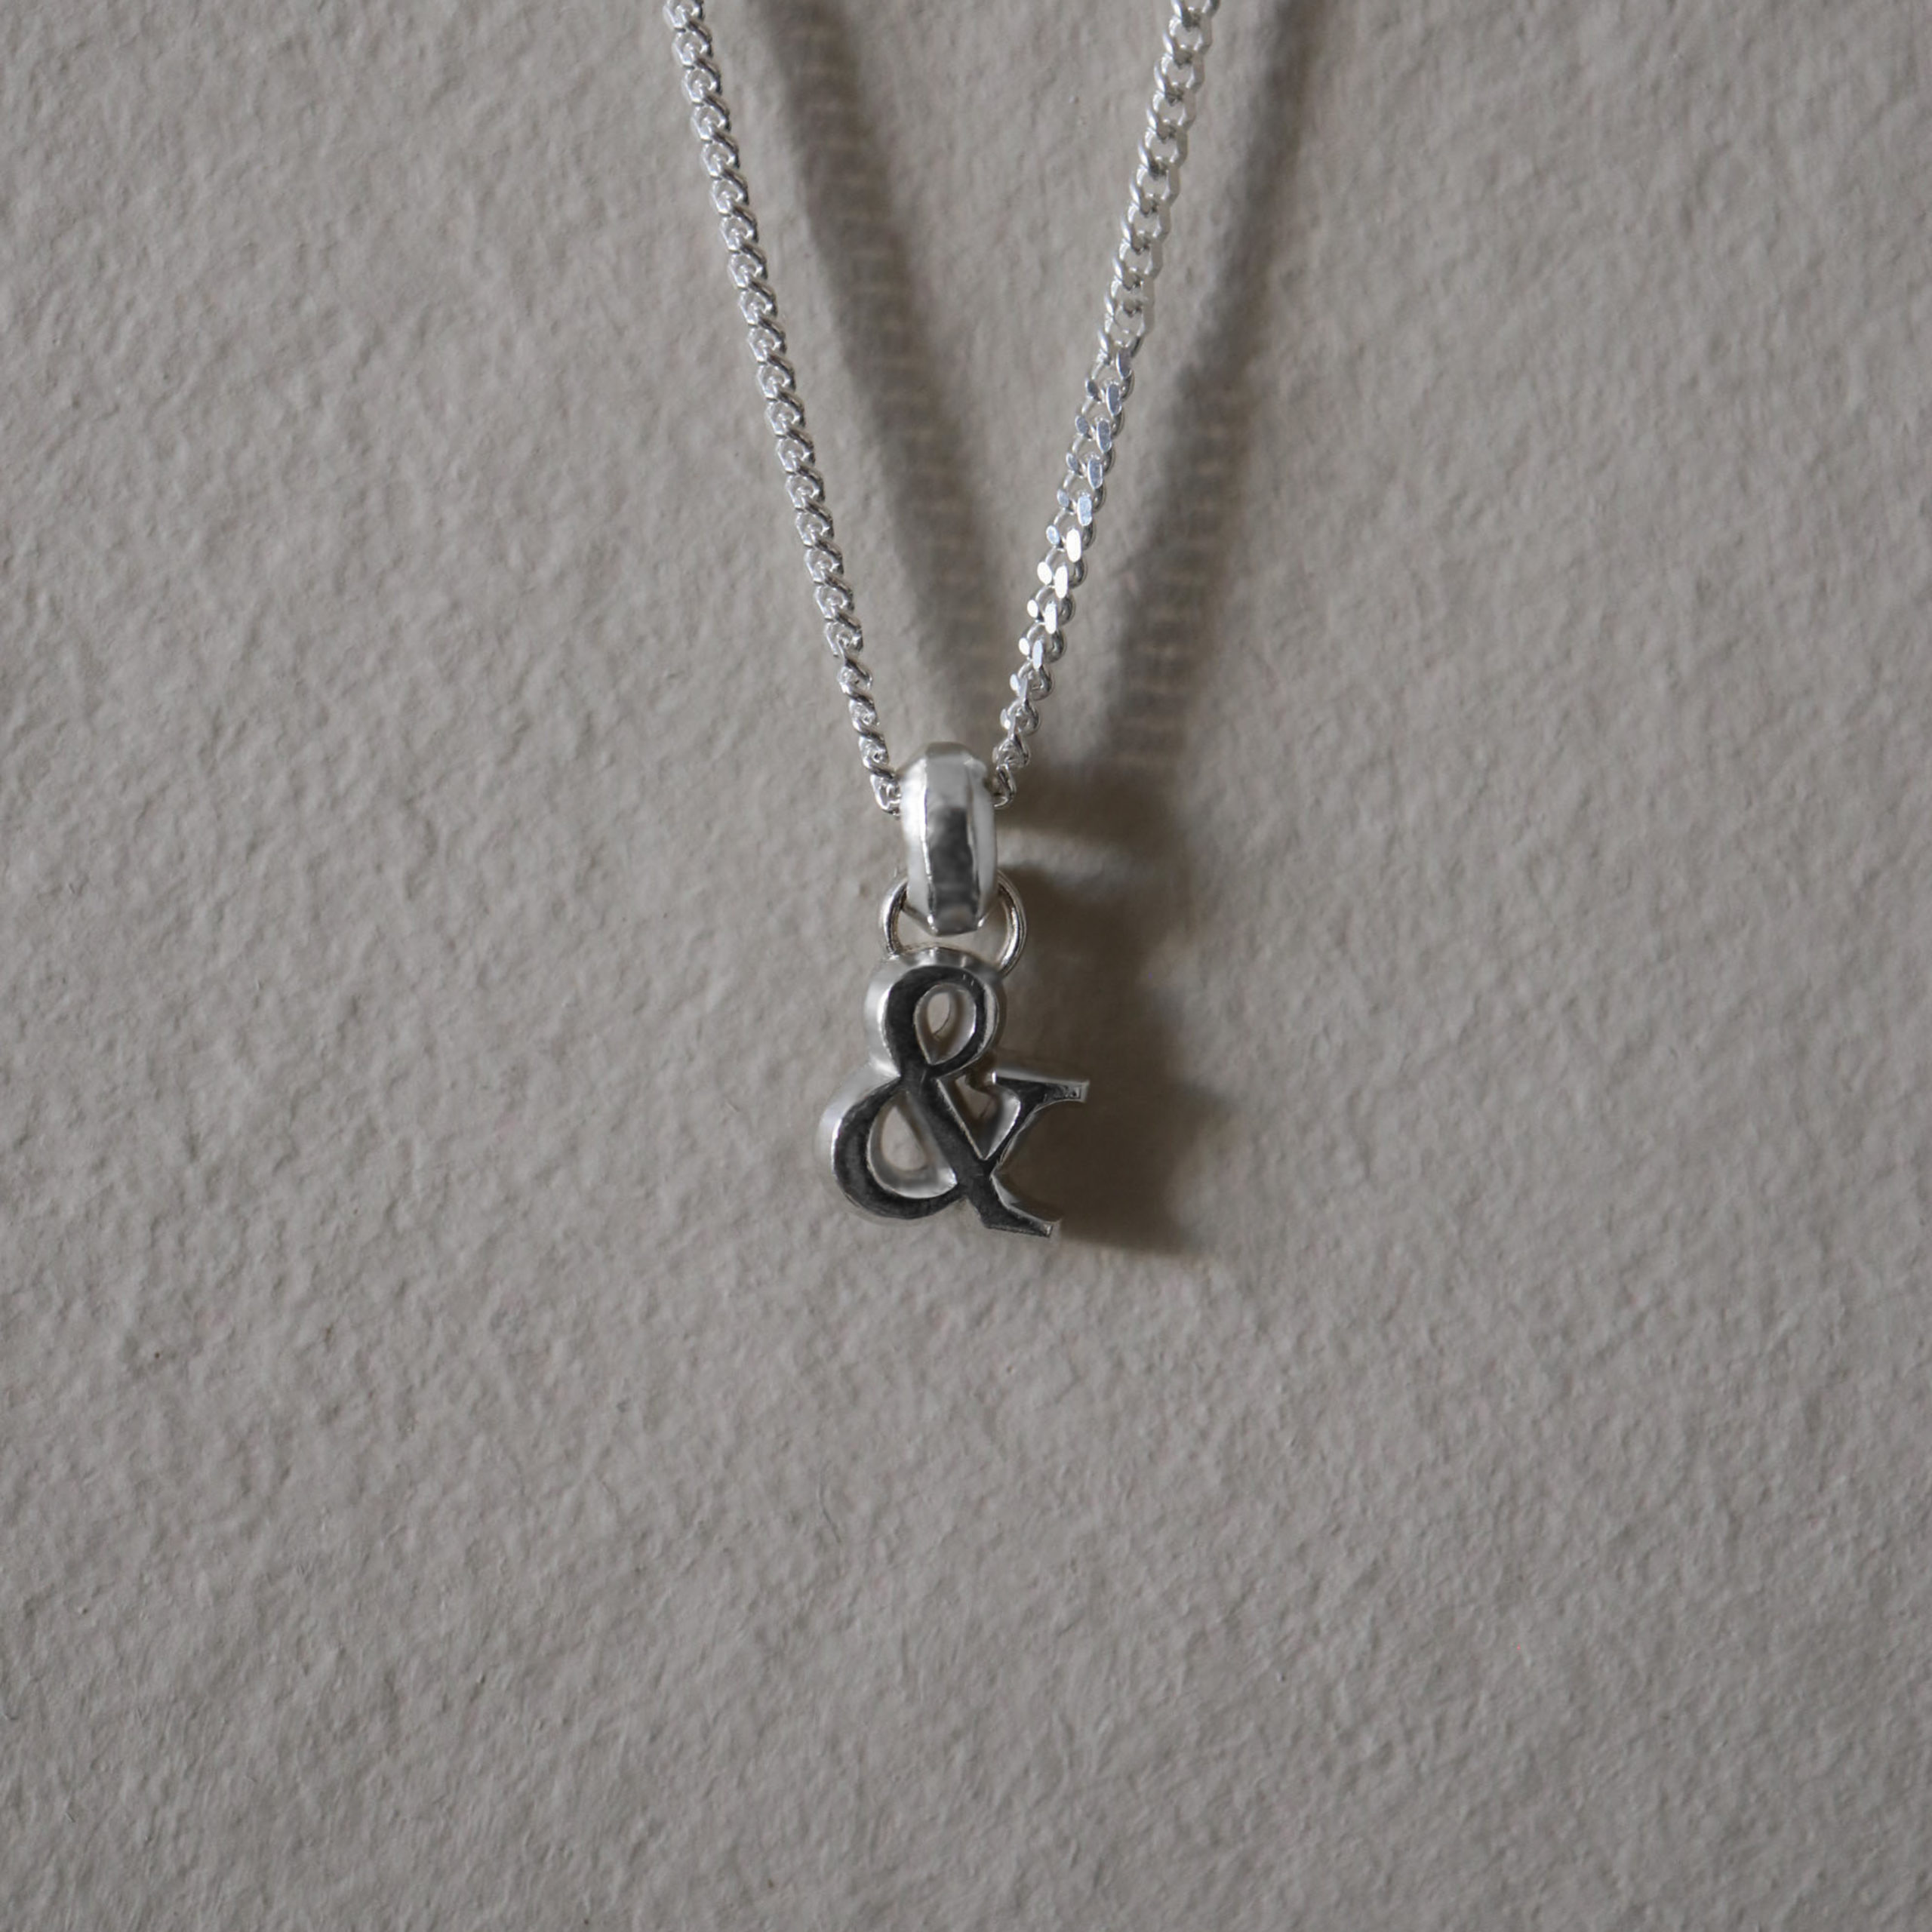 Symbol pendant with bail on curb chain